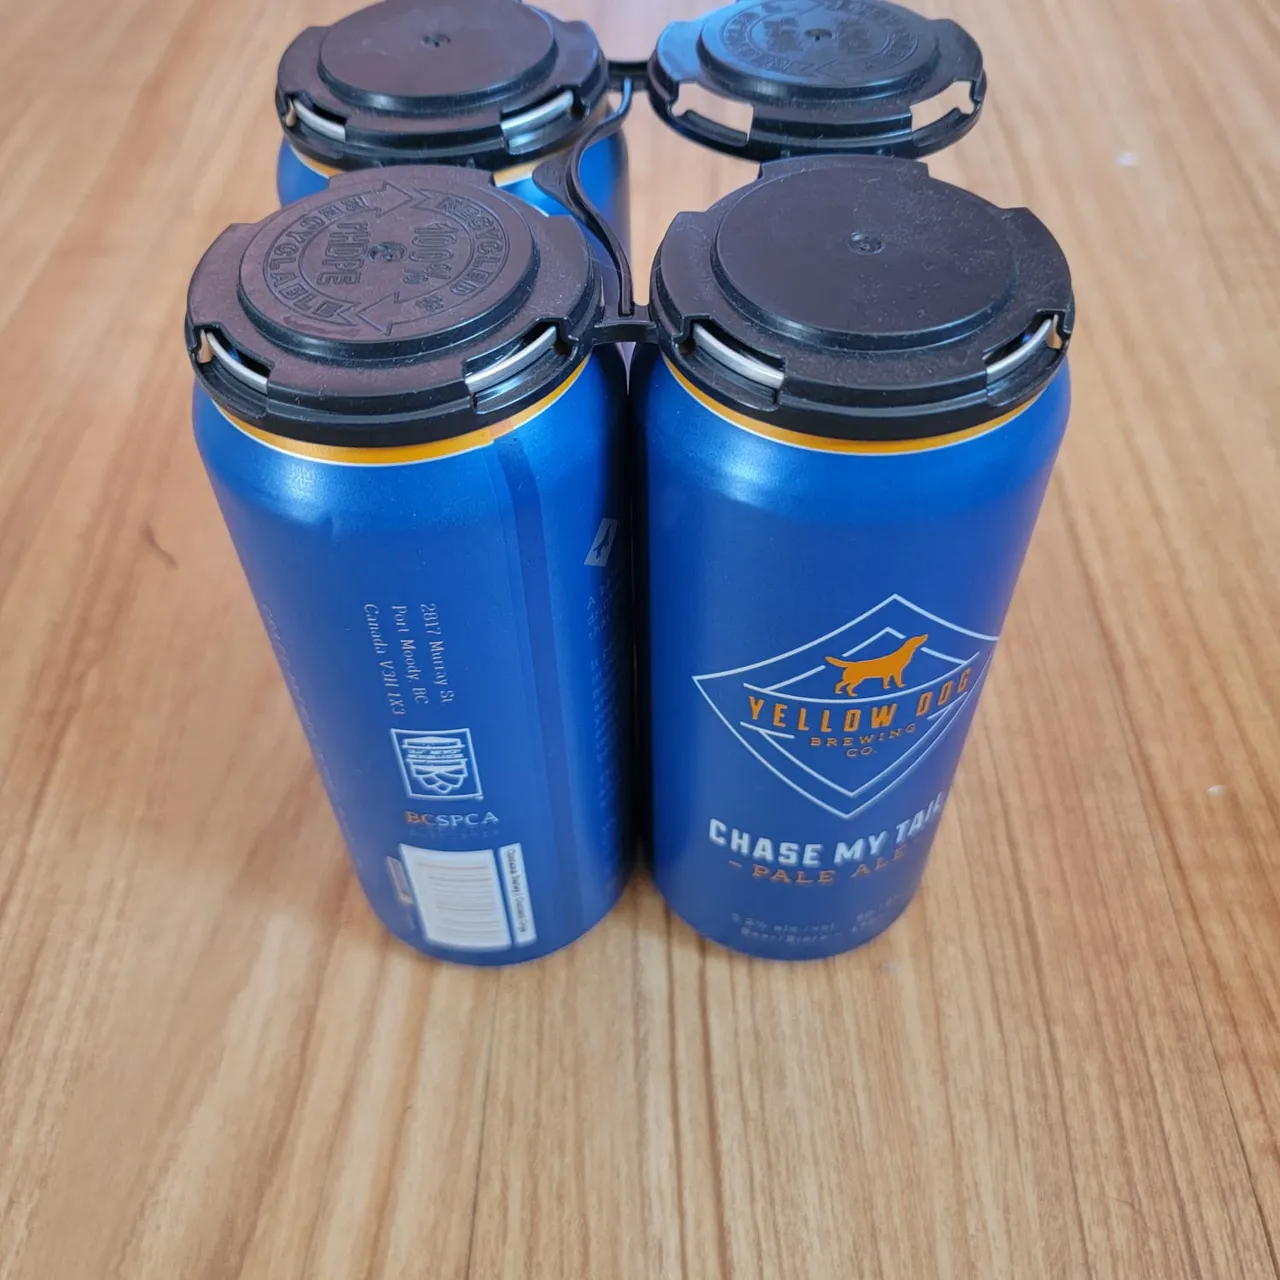 3 cans of Yellow Dog brewing beer photo 1